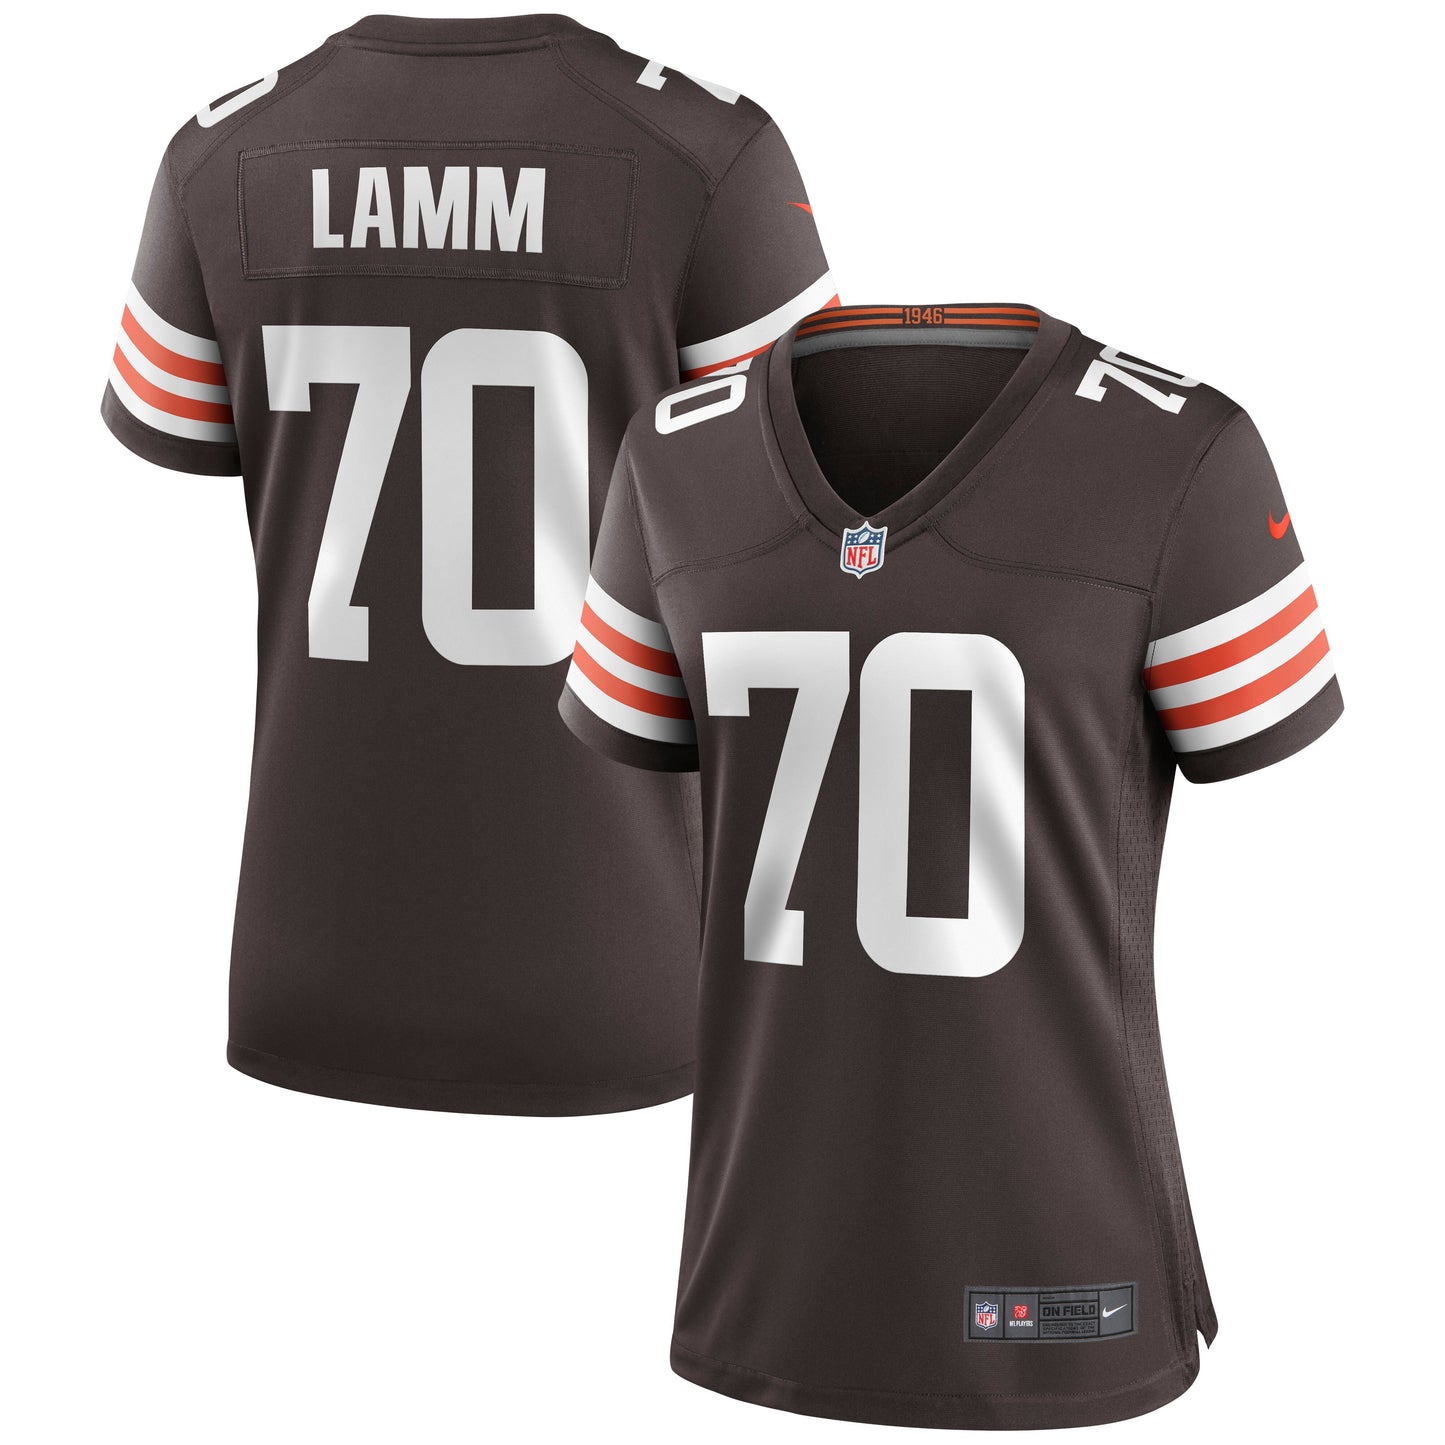 Kendall Lamm Cleveland Browns Nike Women's Game Jersey - Brown